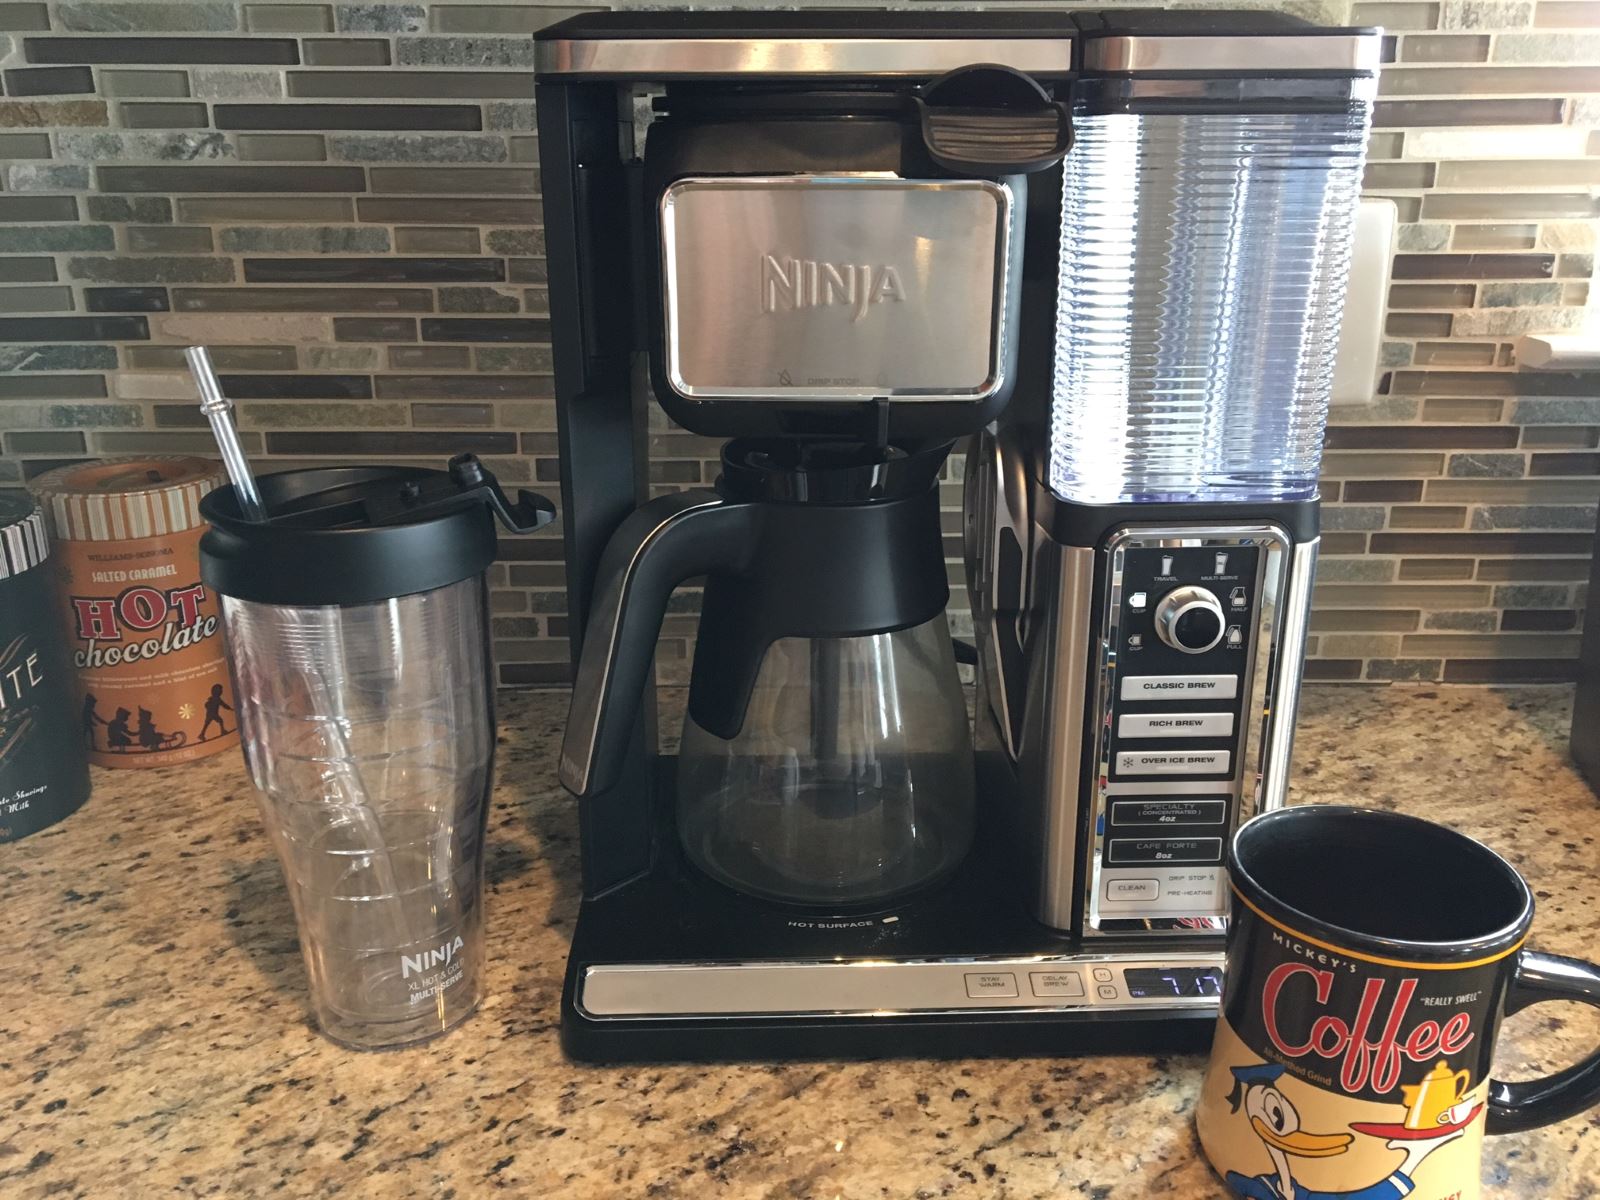 The Ultimate Guide To Cleaning Your Ninja Coffee Maker With Vinegar